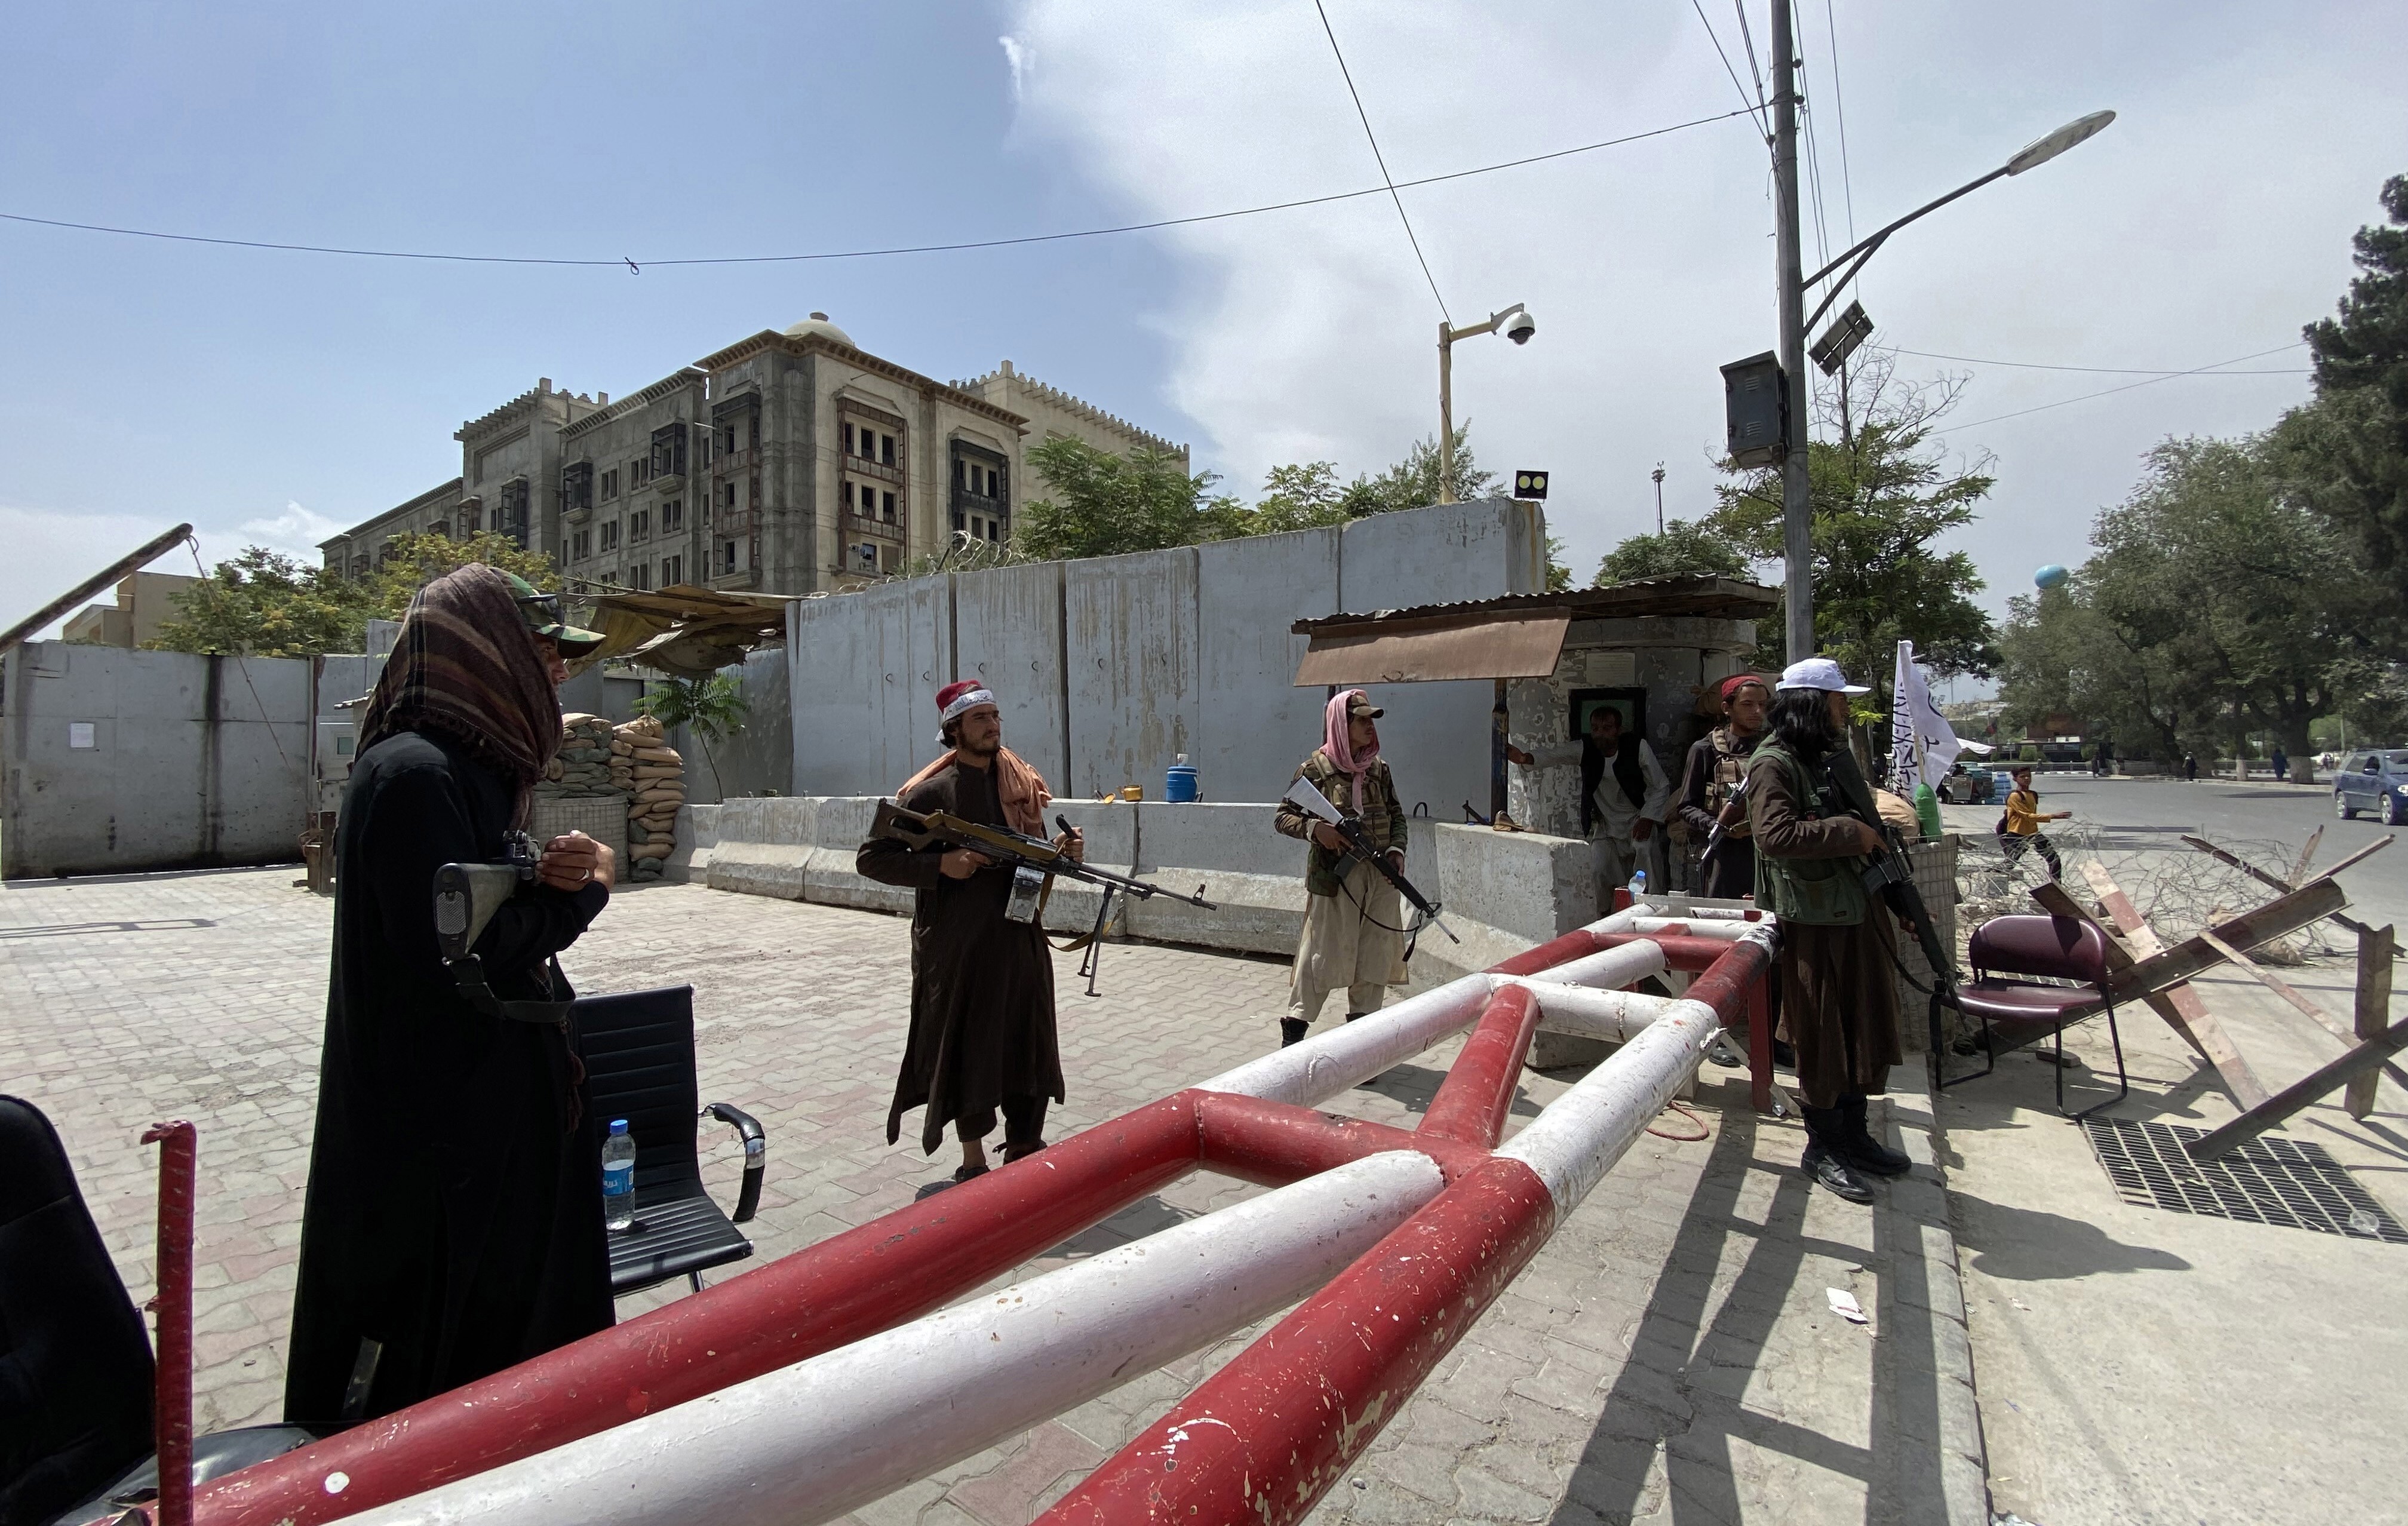 Taliban fighters stand guard on Tuesday outside the Green Zone of Kabul where most embassies are situated, a day after the insurgent group took control of the Afghan capital. Photo: EPA-EFE